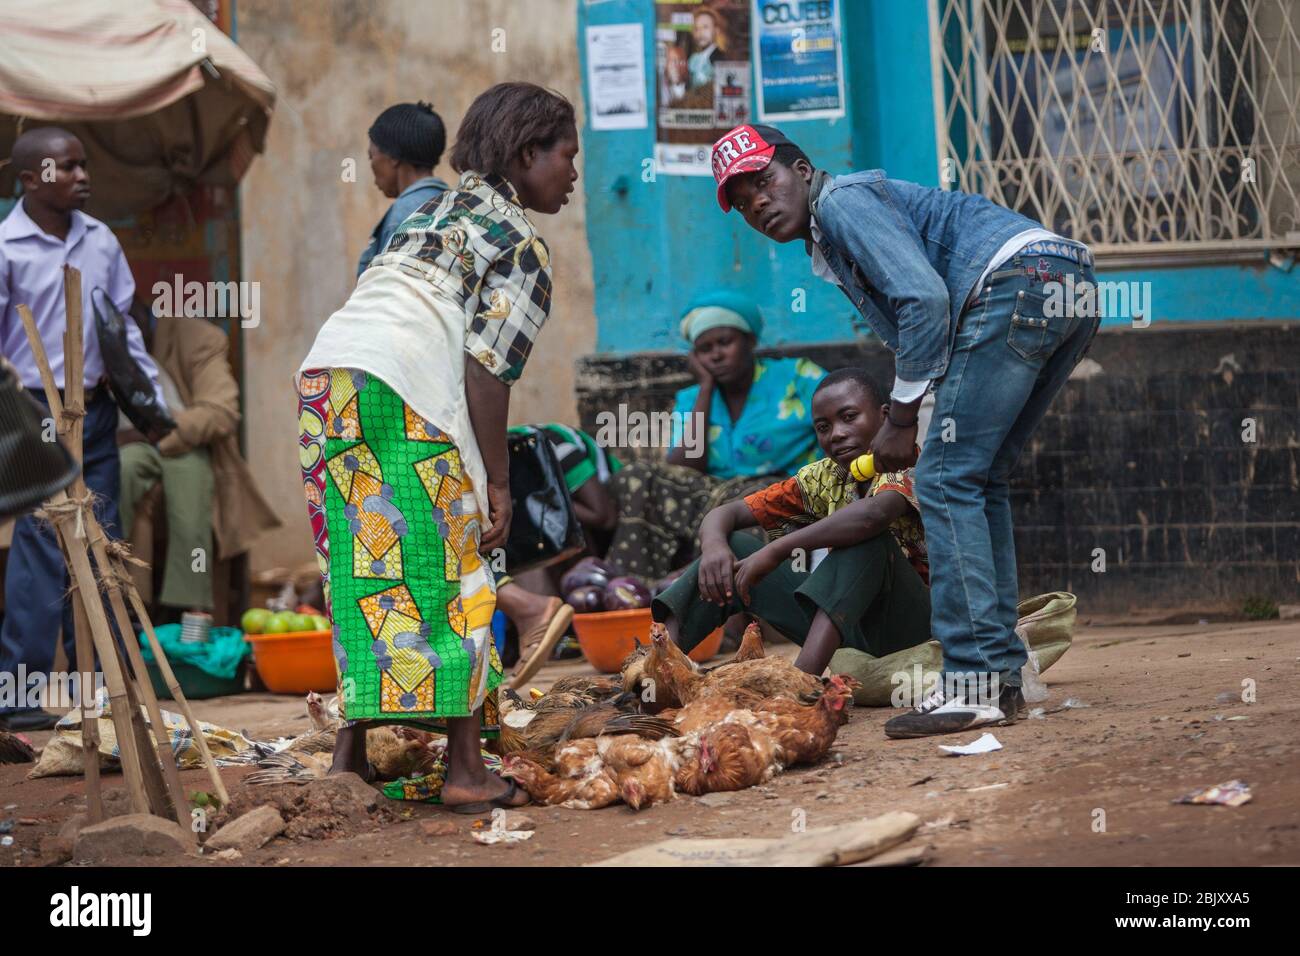 Bukavu, Democratic Republic of the Congo: trade on the street Congolese people sitting on the ground selling chicken Stock Photo